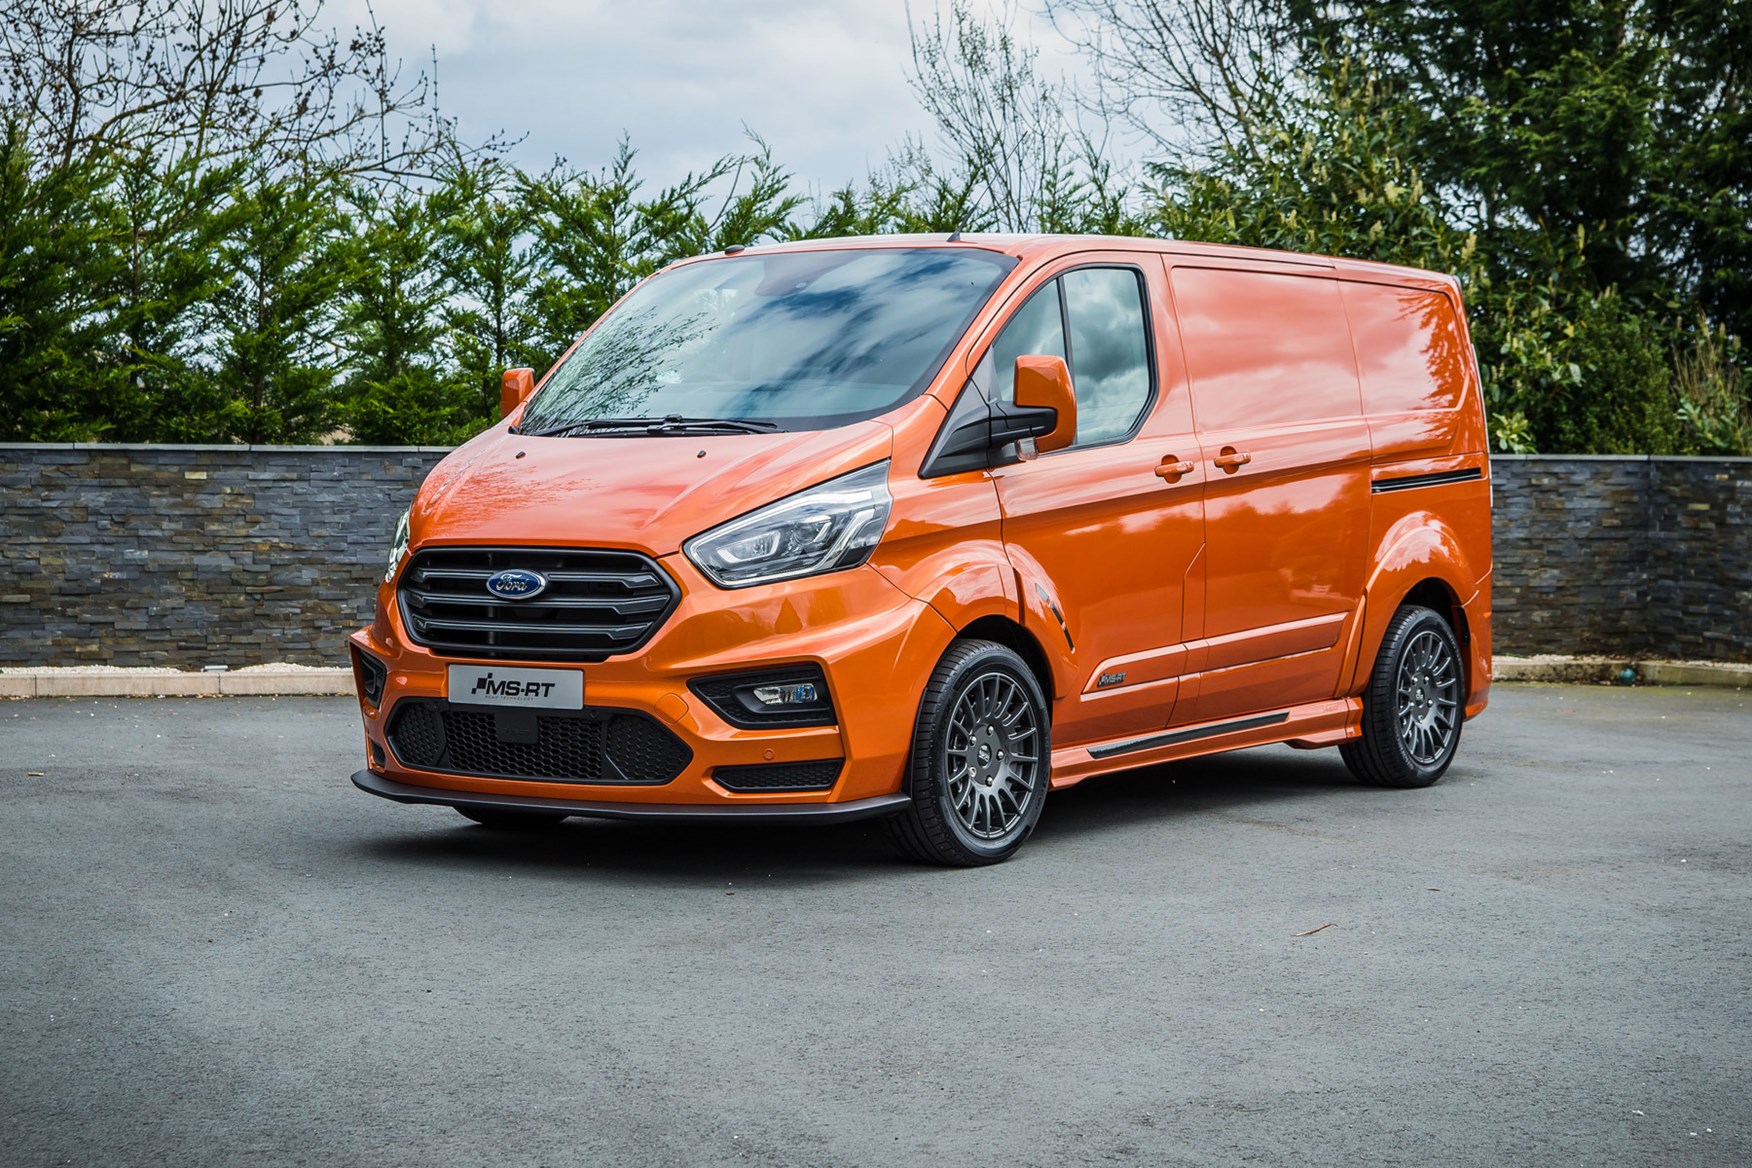 New Ford Transit Custom MS-RT for 2018 - first pictures and details ...